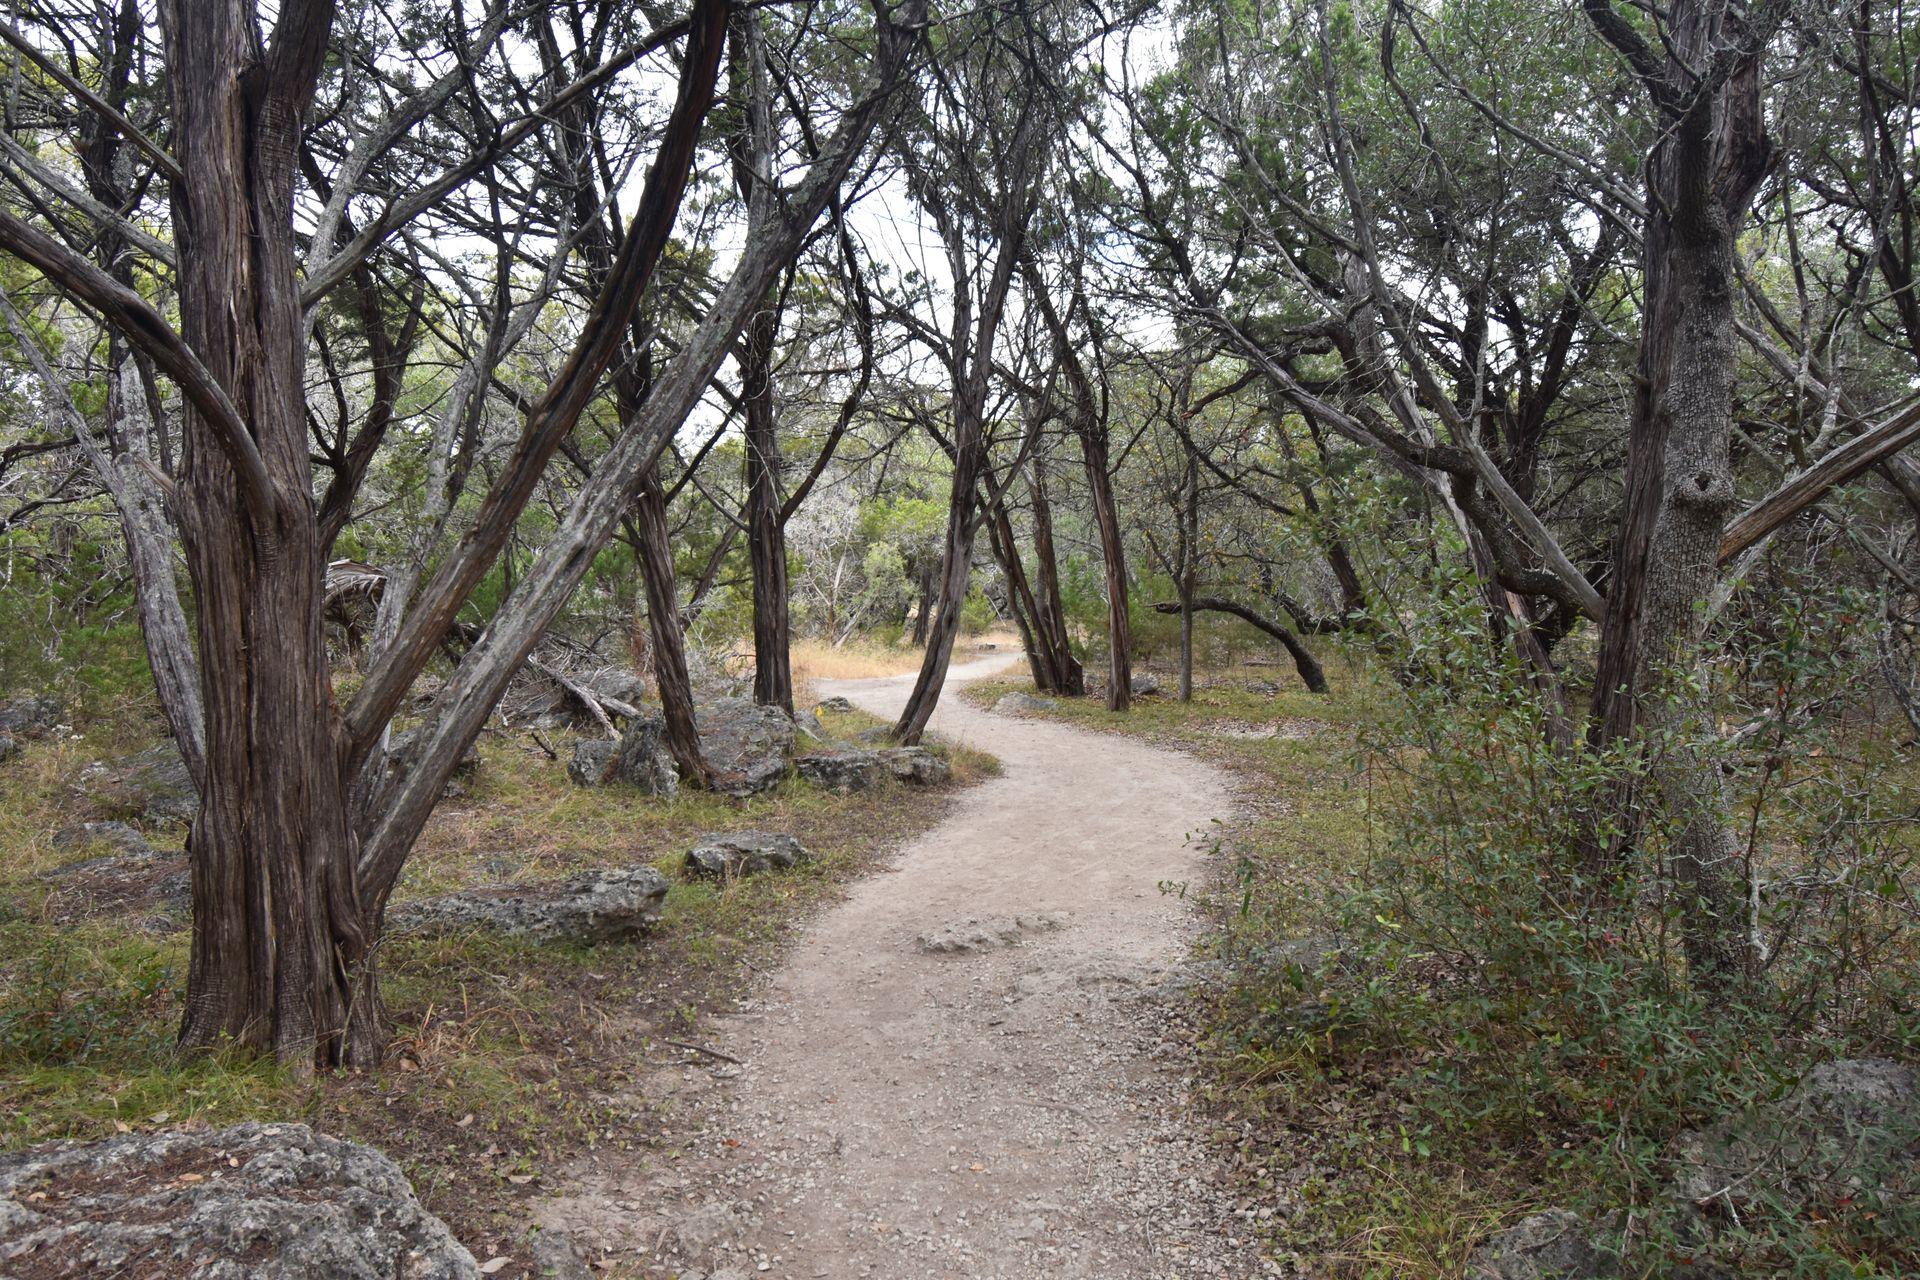 A flat trail winding through an area of bare trees.